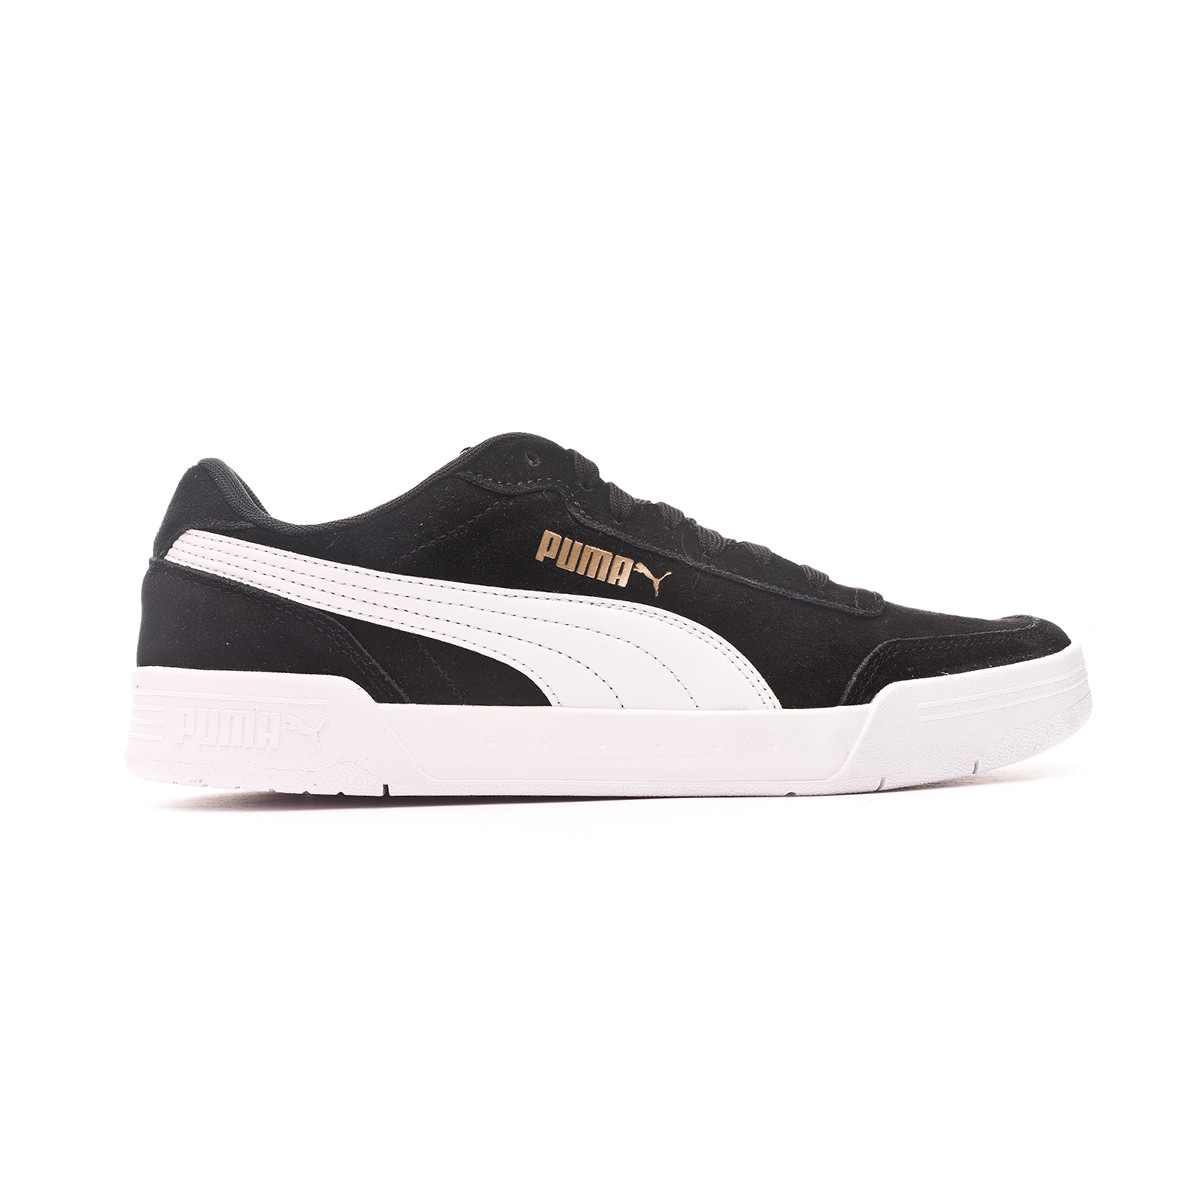 black white and gold pumas